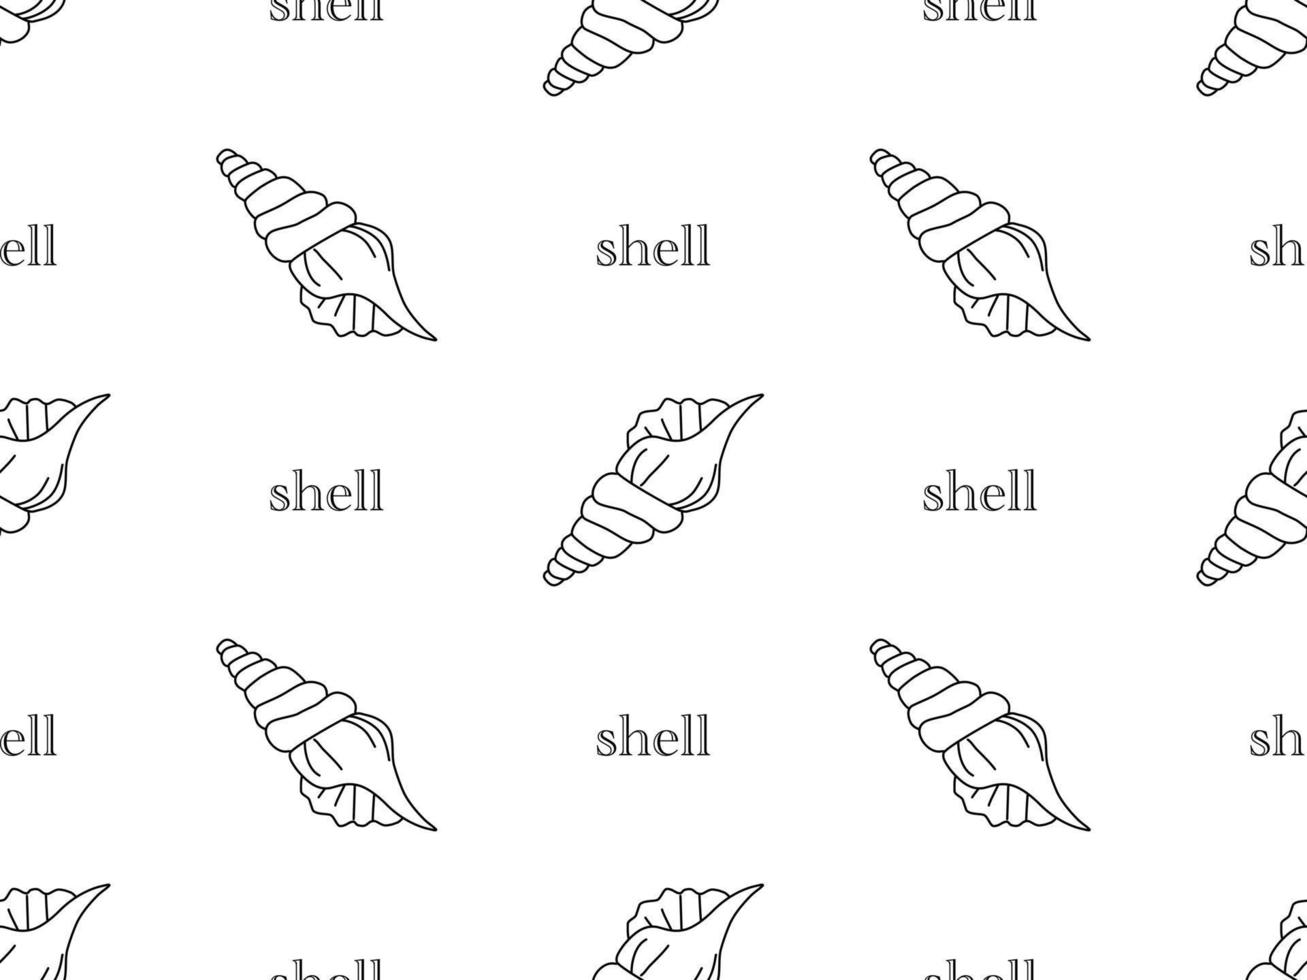 Shells cartoon character seamless pattern on white background vector